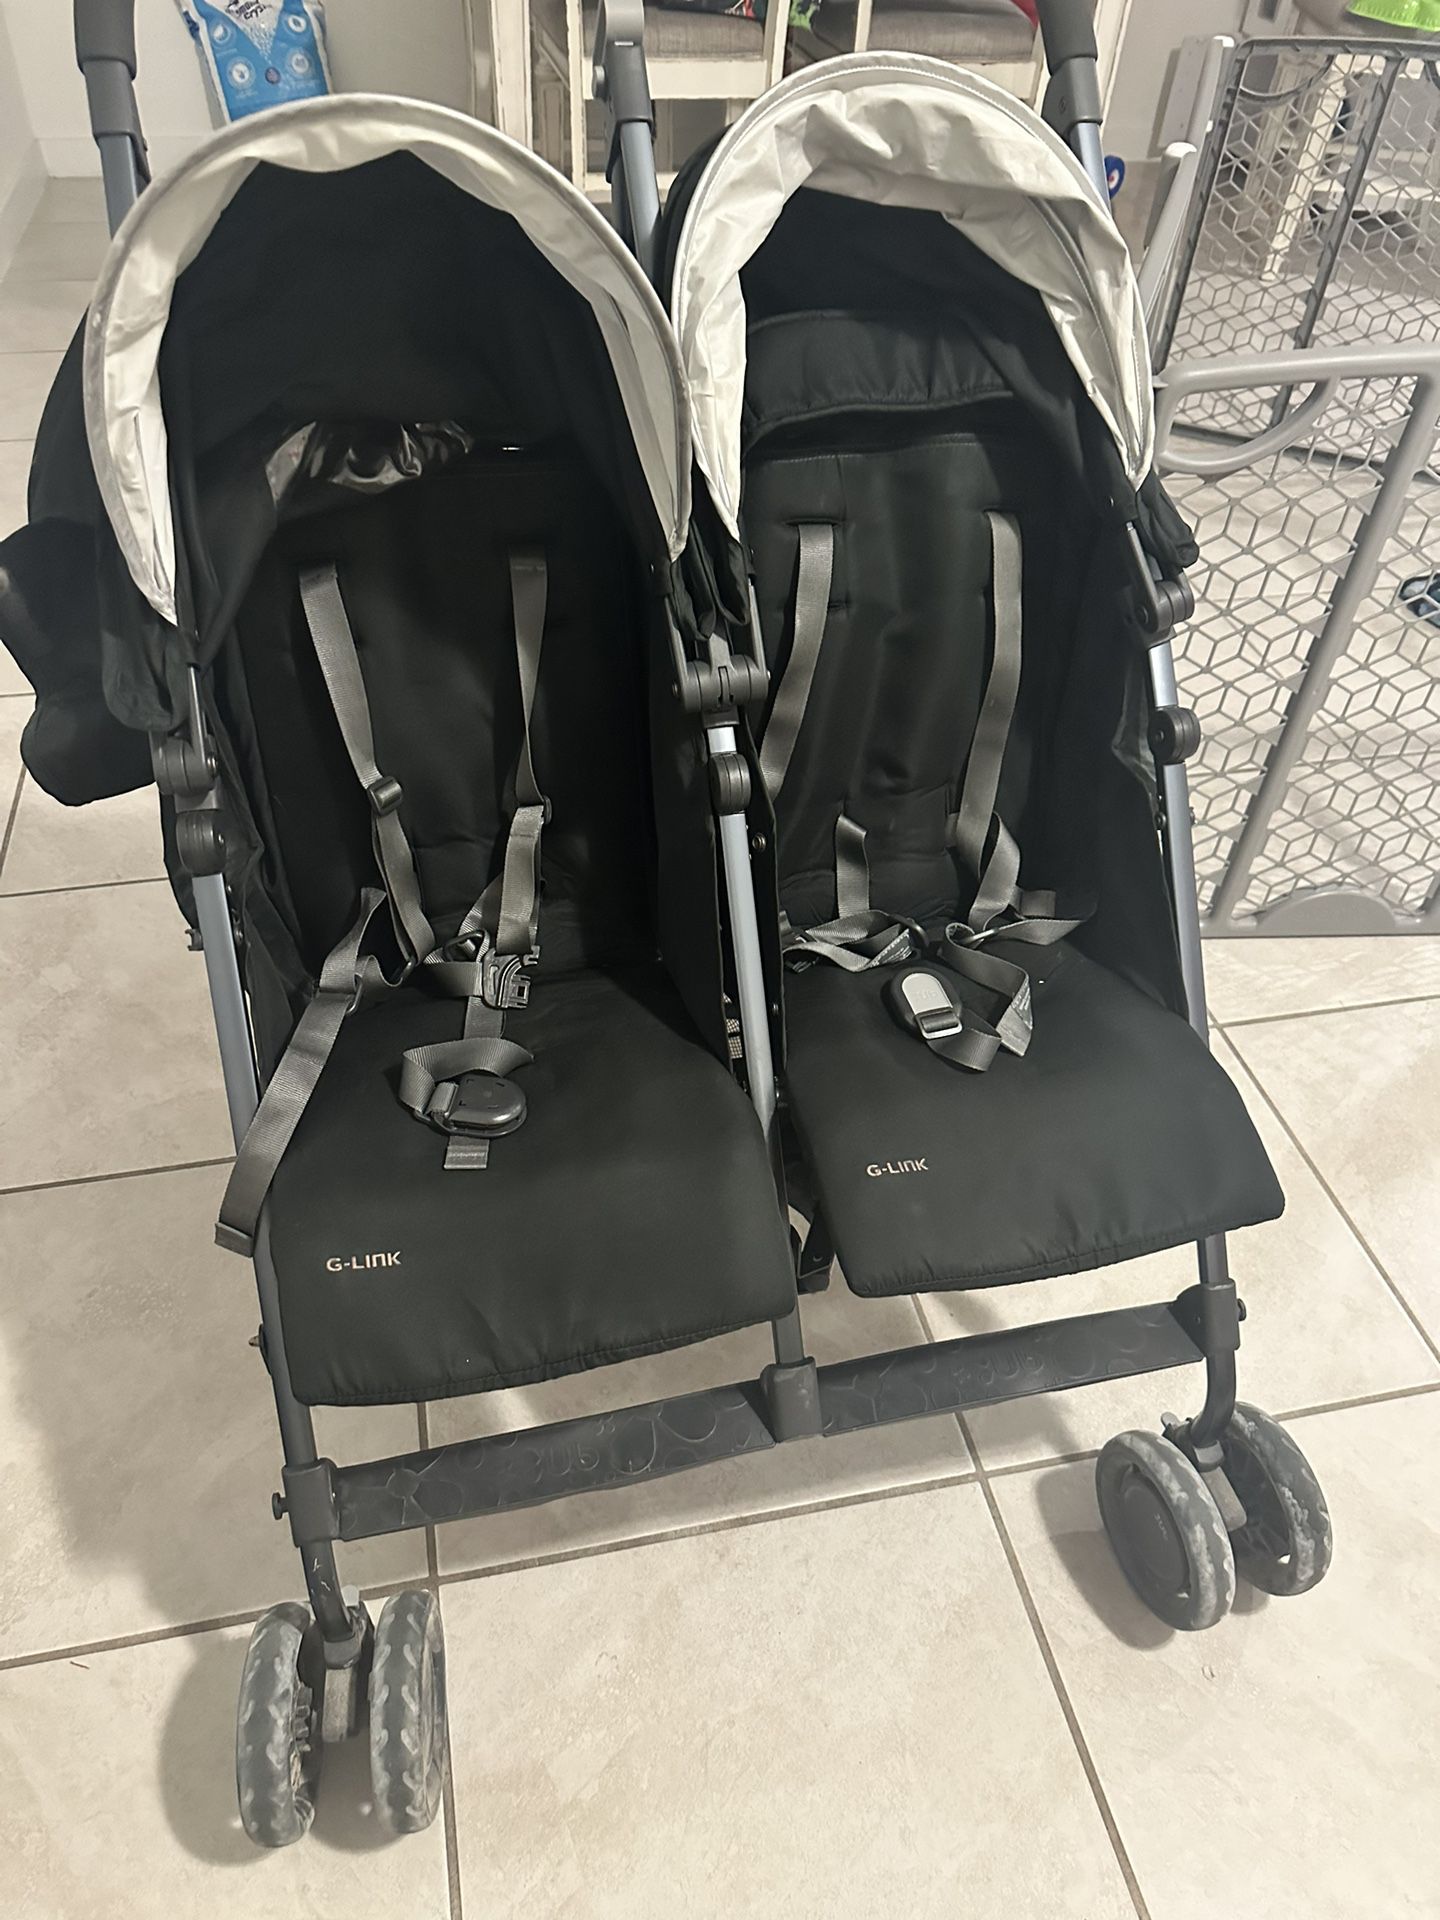 Uppababy G Link Double Stroller